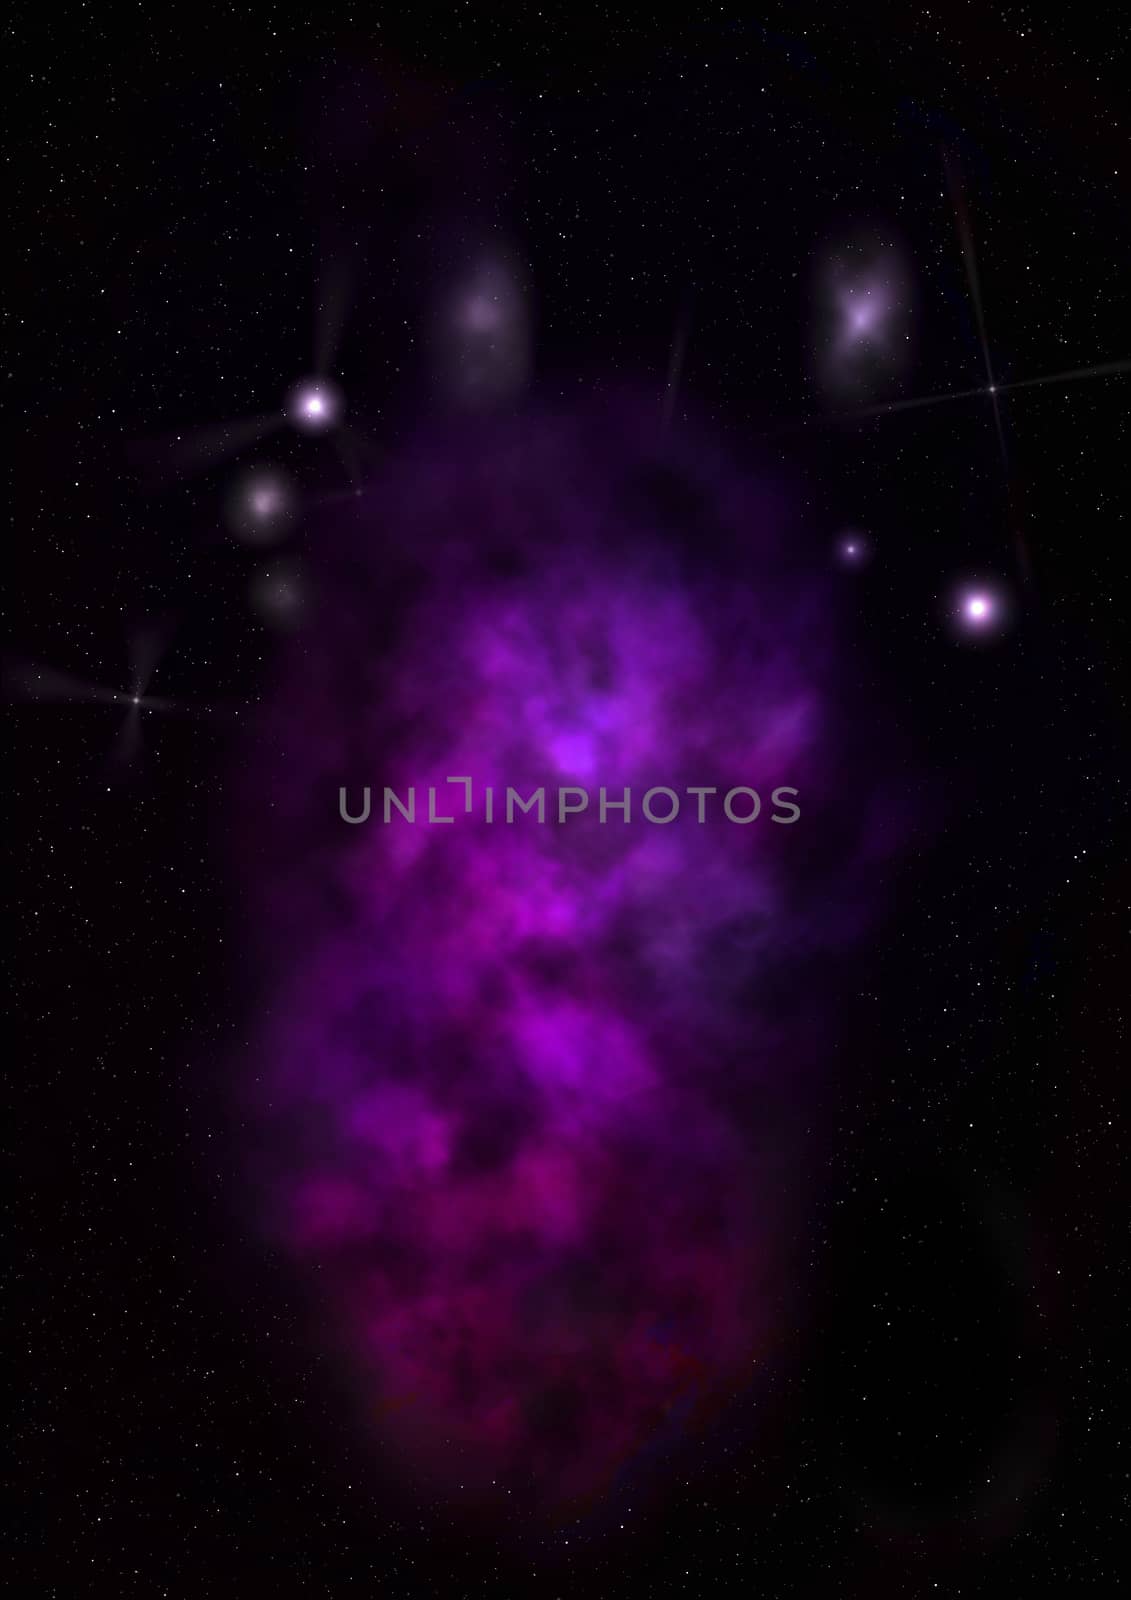 Star field in space a nebulae and a gas congestion. "Elements of this image furnished by NASA".